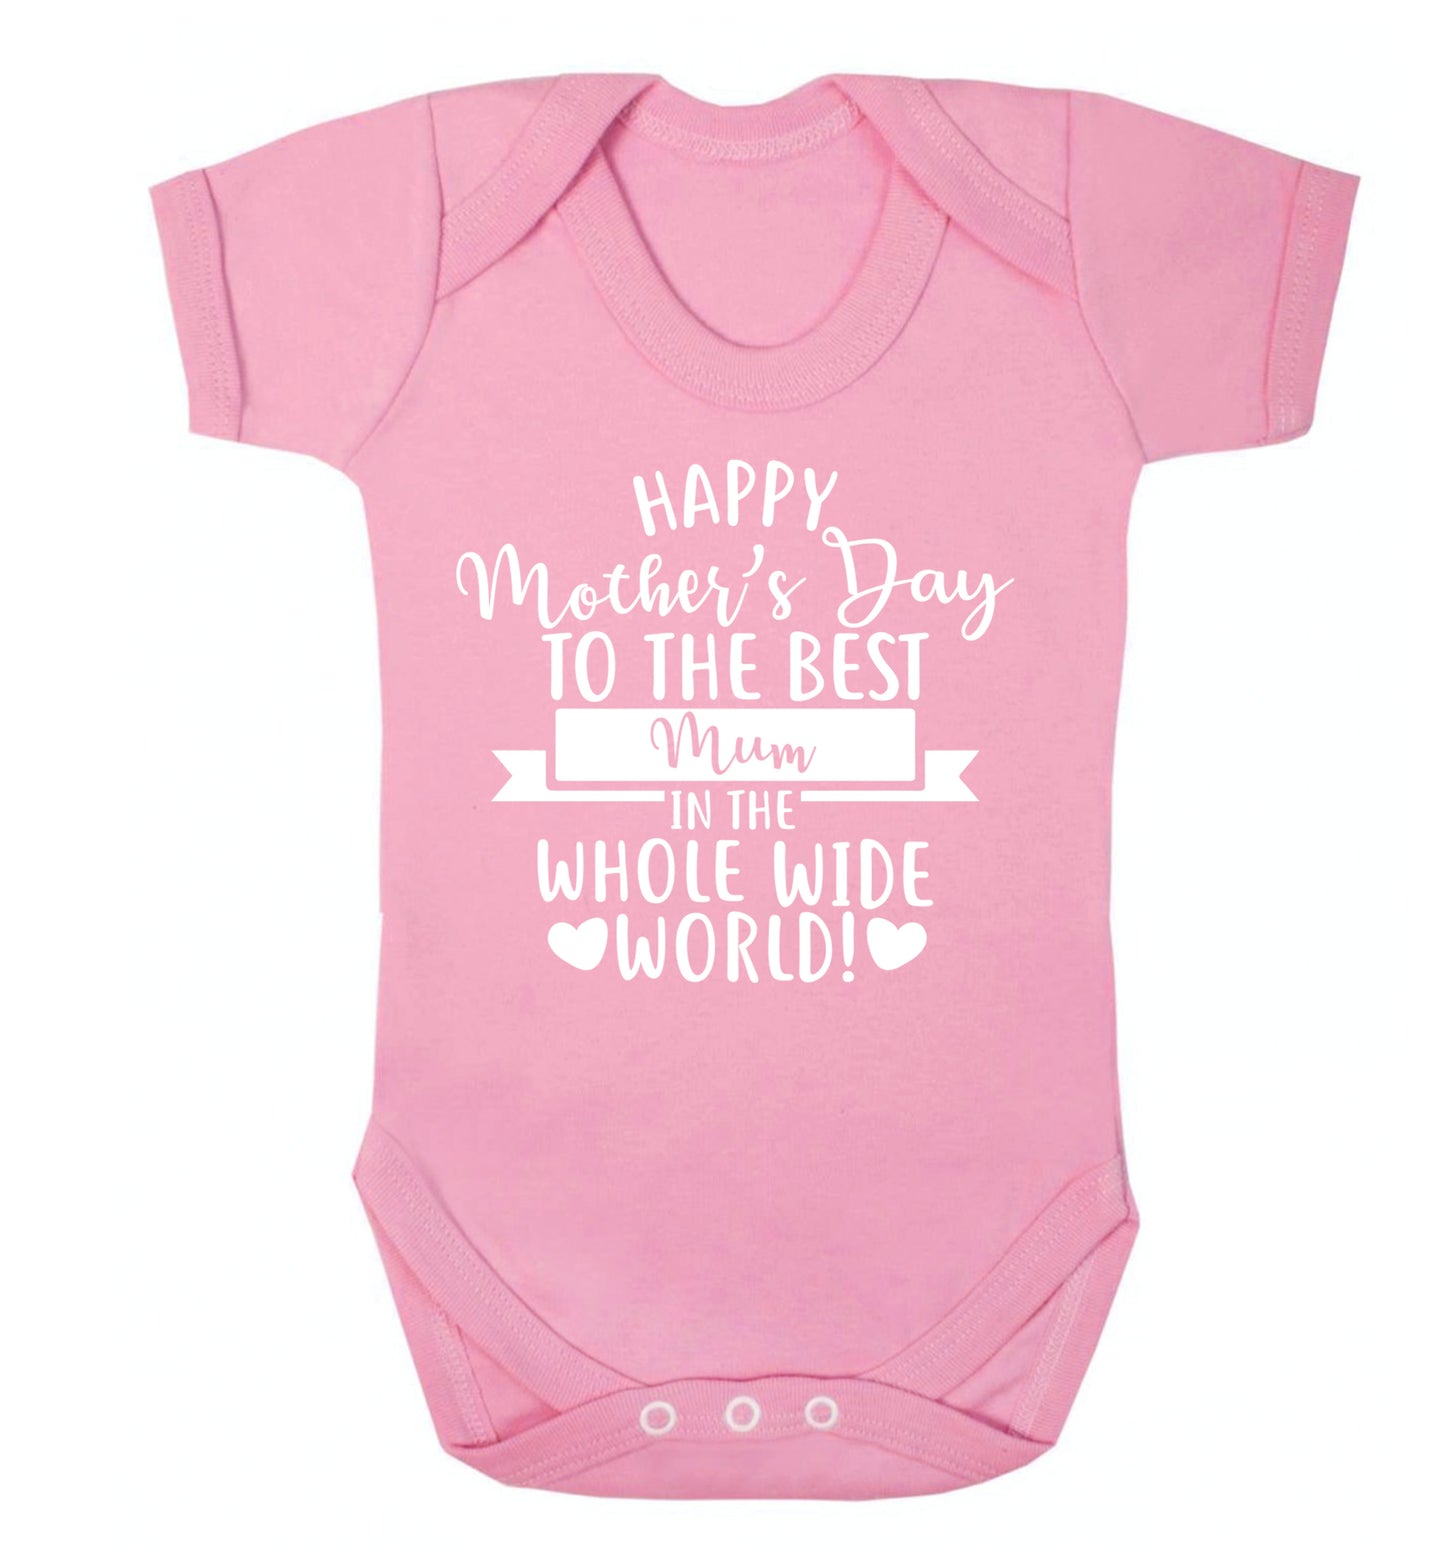 Happy Mother's Day to the best mum in the whole wide world! Baby Vest pale pink 18-24 months